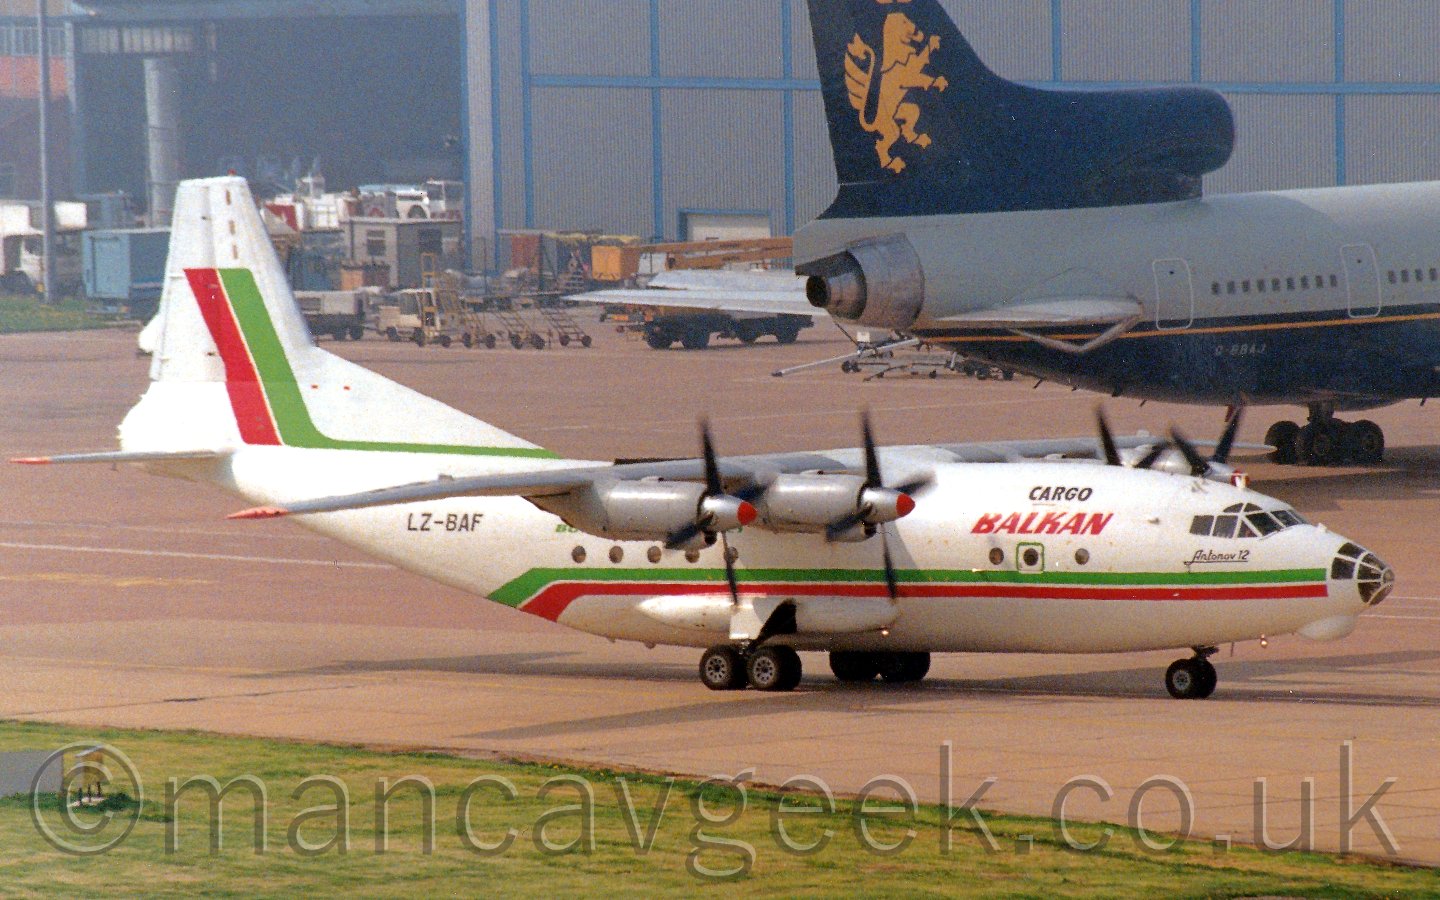 Side view of a white, green and red high-winged, 4 propellor-engined cargo plane taxiing from left to right, with a larger grey and blue plane parked by a grey hangar in the background.